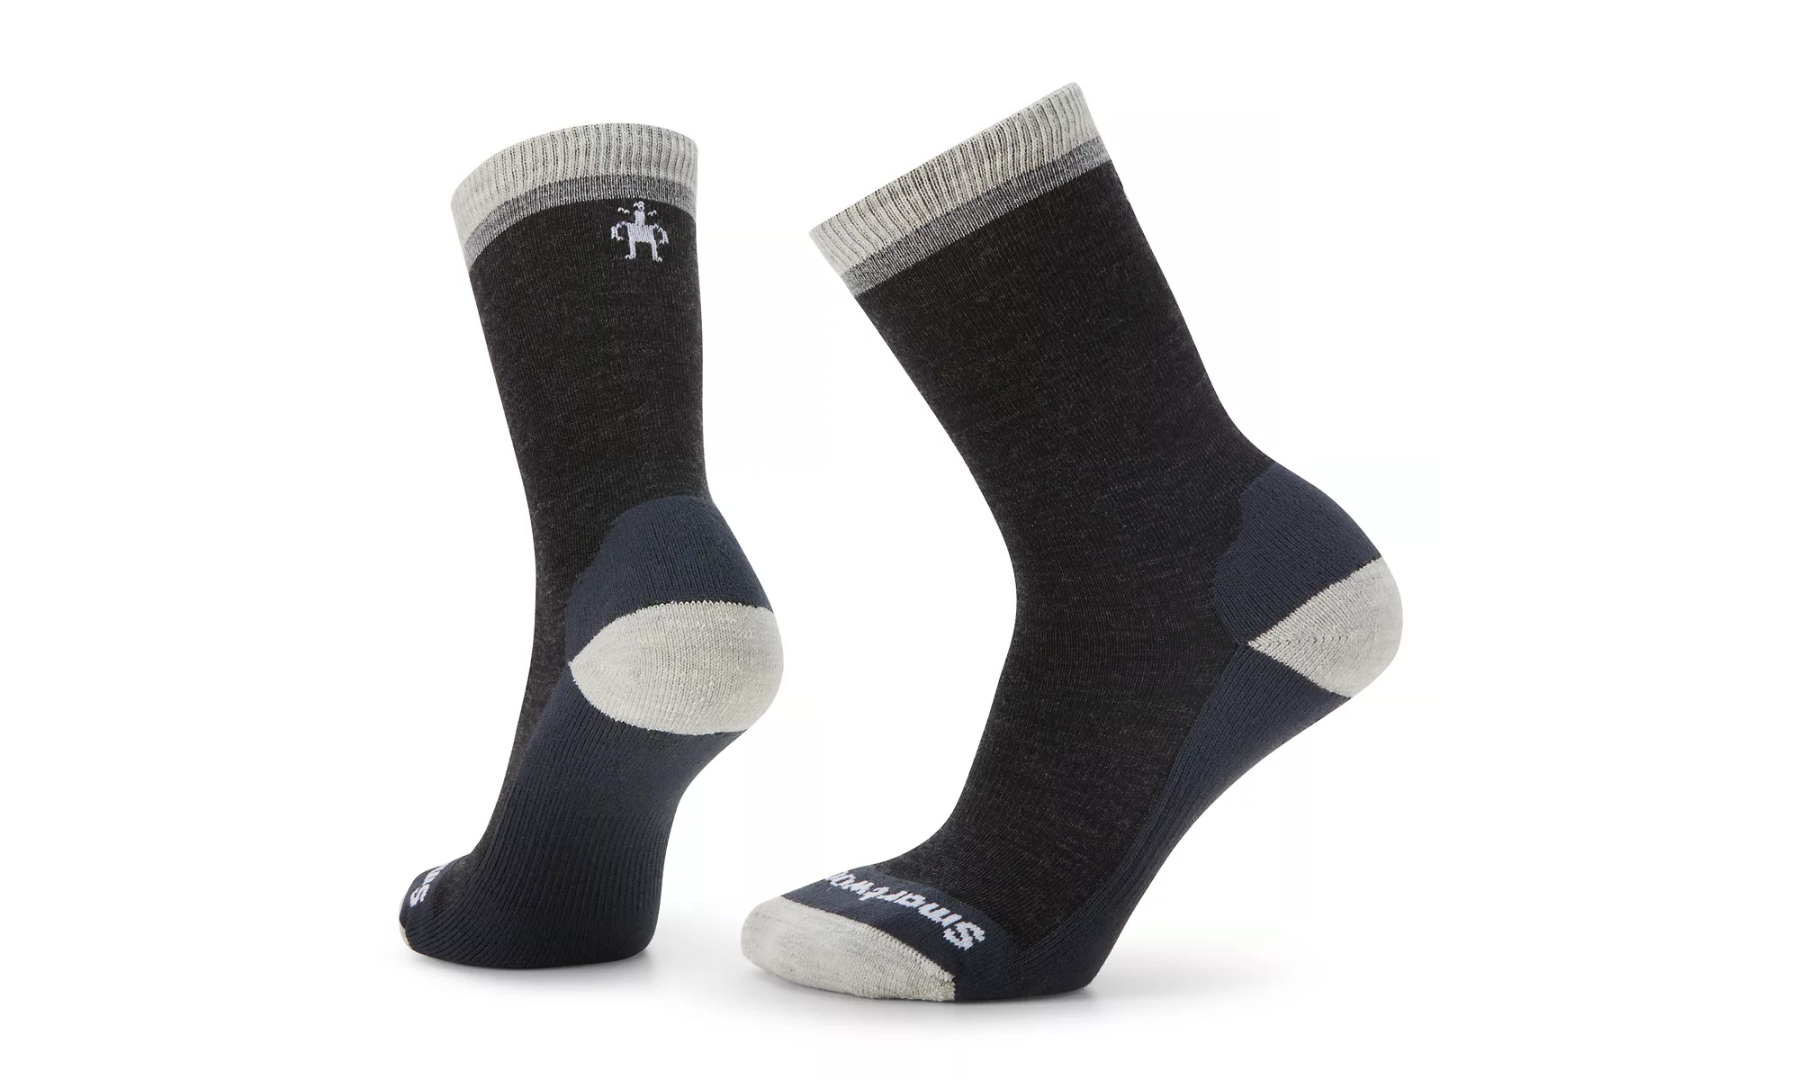 Women's Smartwool Everyday Best Friend Light Cushion Crew Socks Color: Charcoal